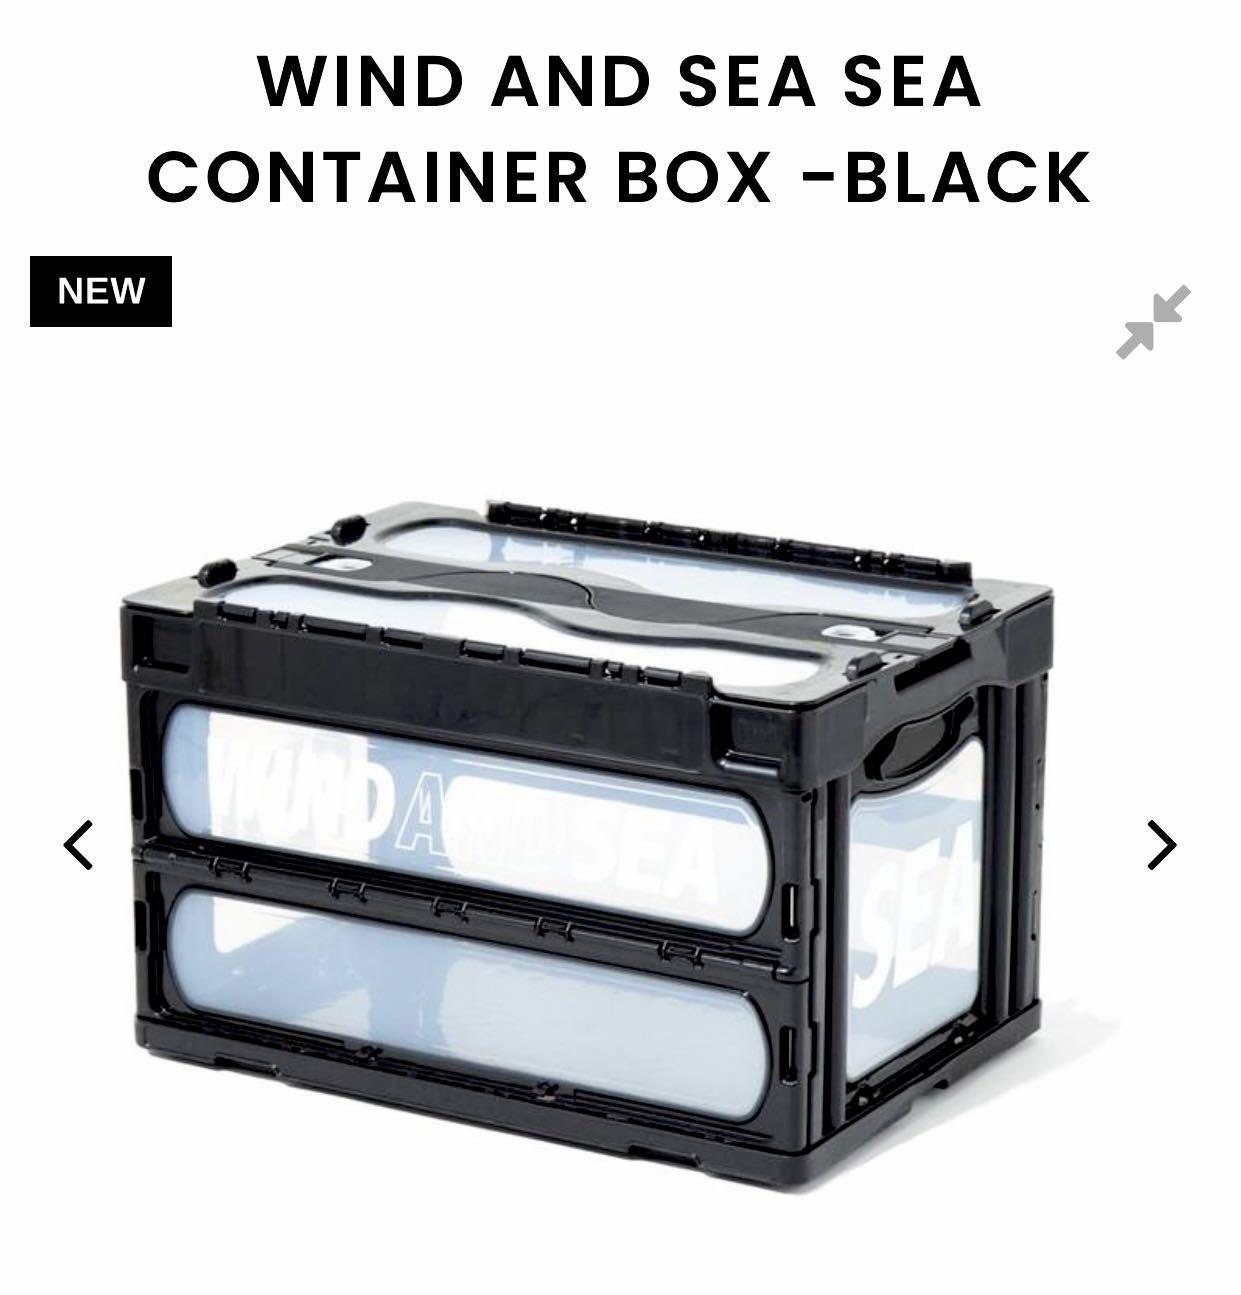 Wind and Sea 50L container; not human made or Neighborhood